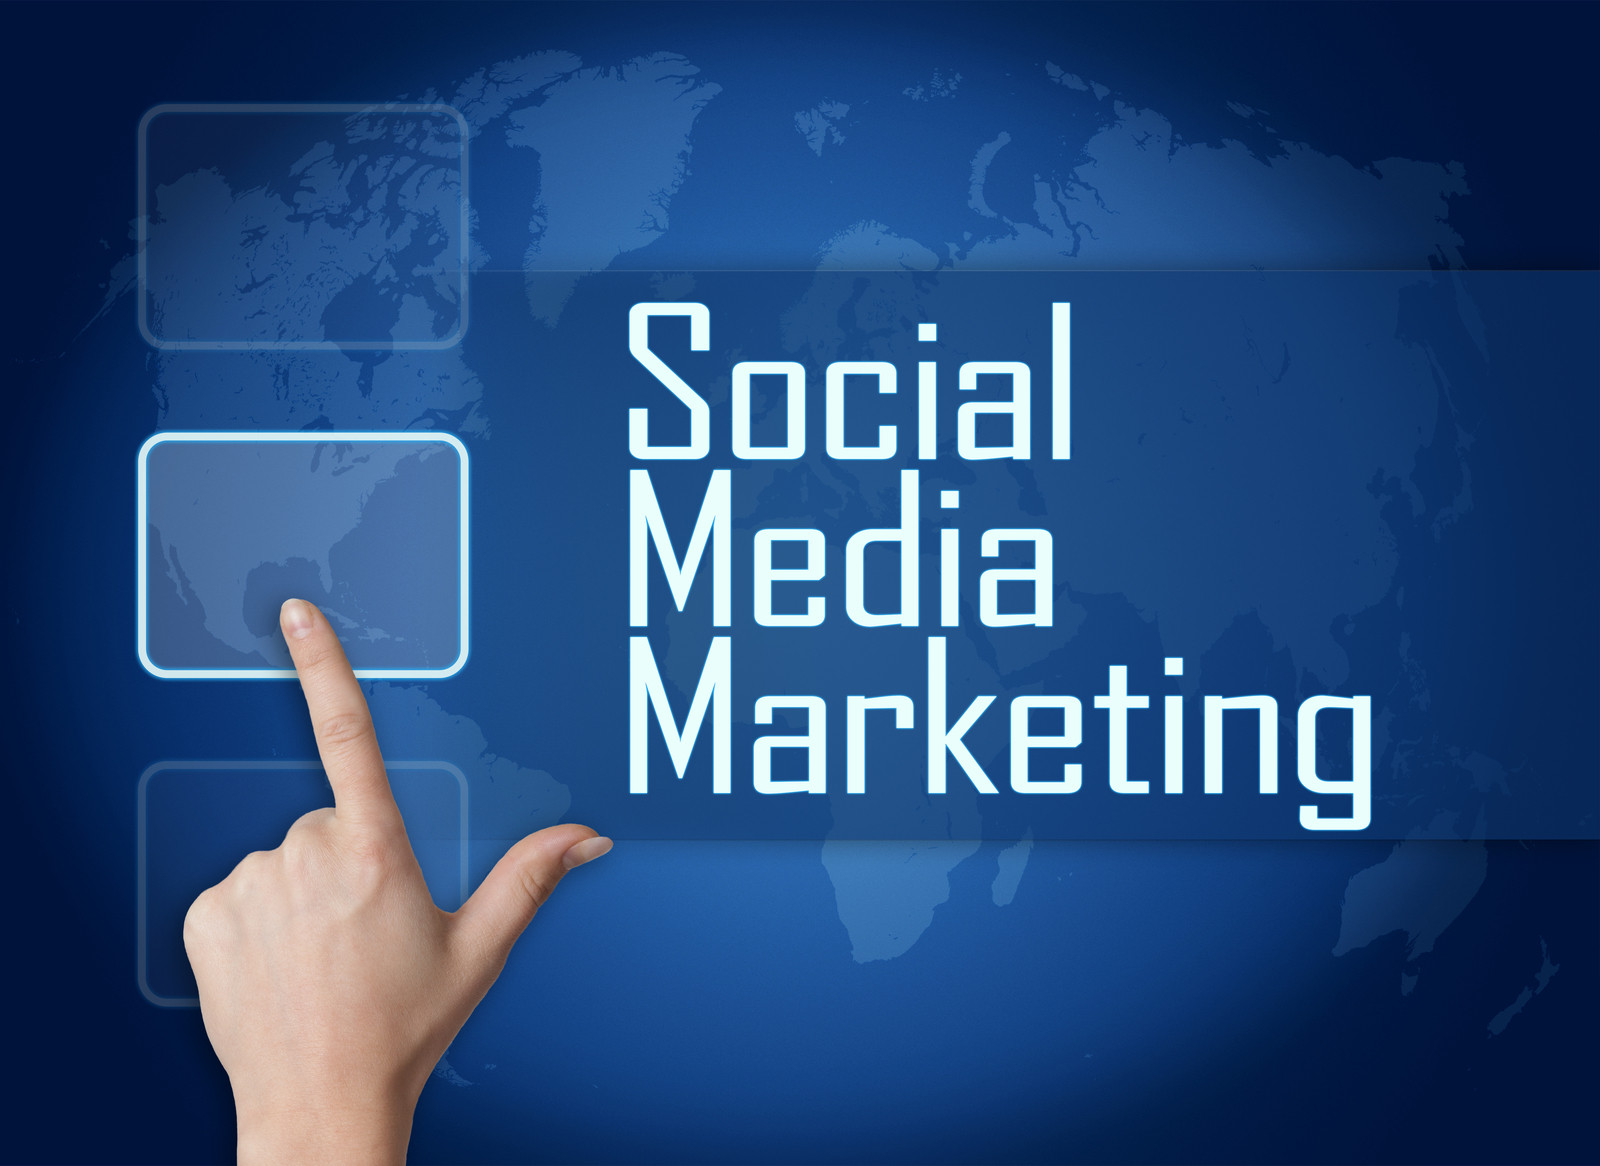 Benefits of Social Media Marketing for Small Businesses